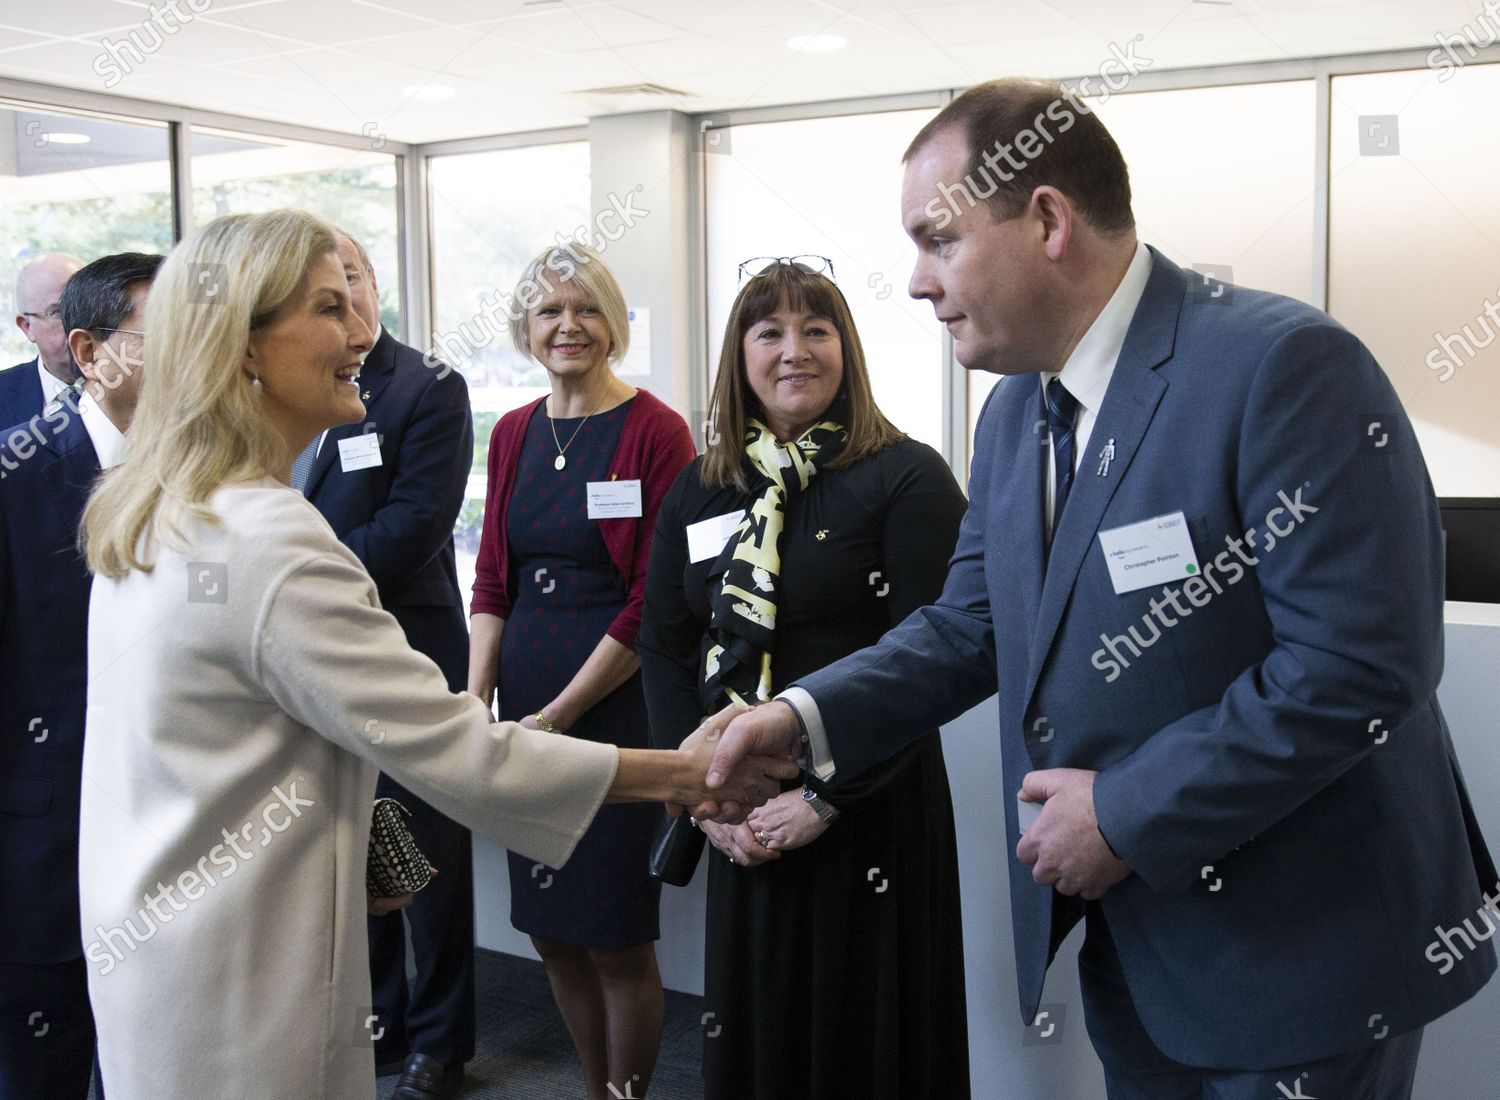 CASA REAL BRITÁNICA - Página 14 Sophie-countess-of-wessex-opens-new-health-sciences-institute-university-of-surrey-guildford-uk-shutterstock-editorial-10542421c